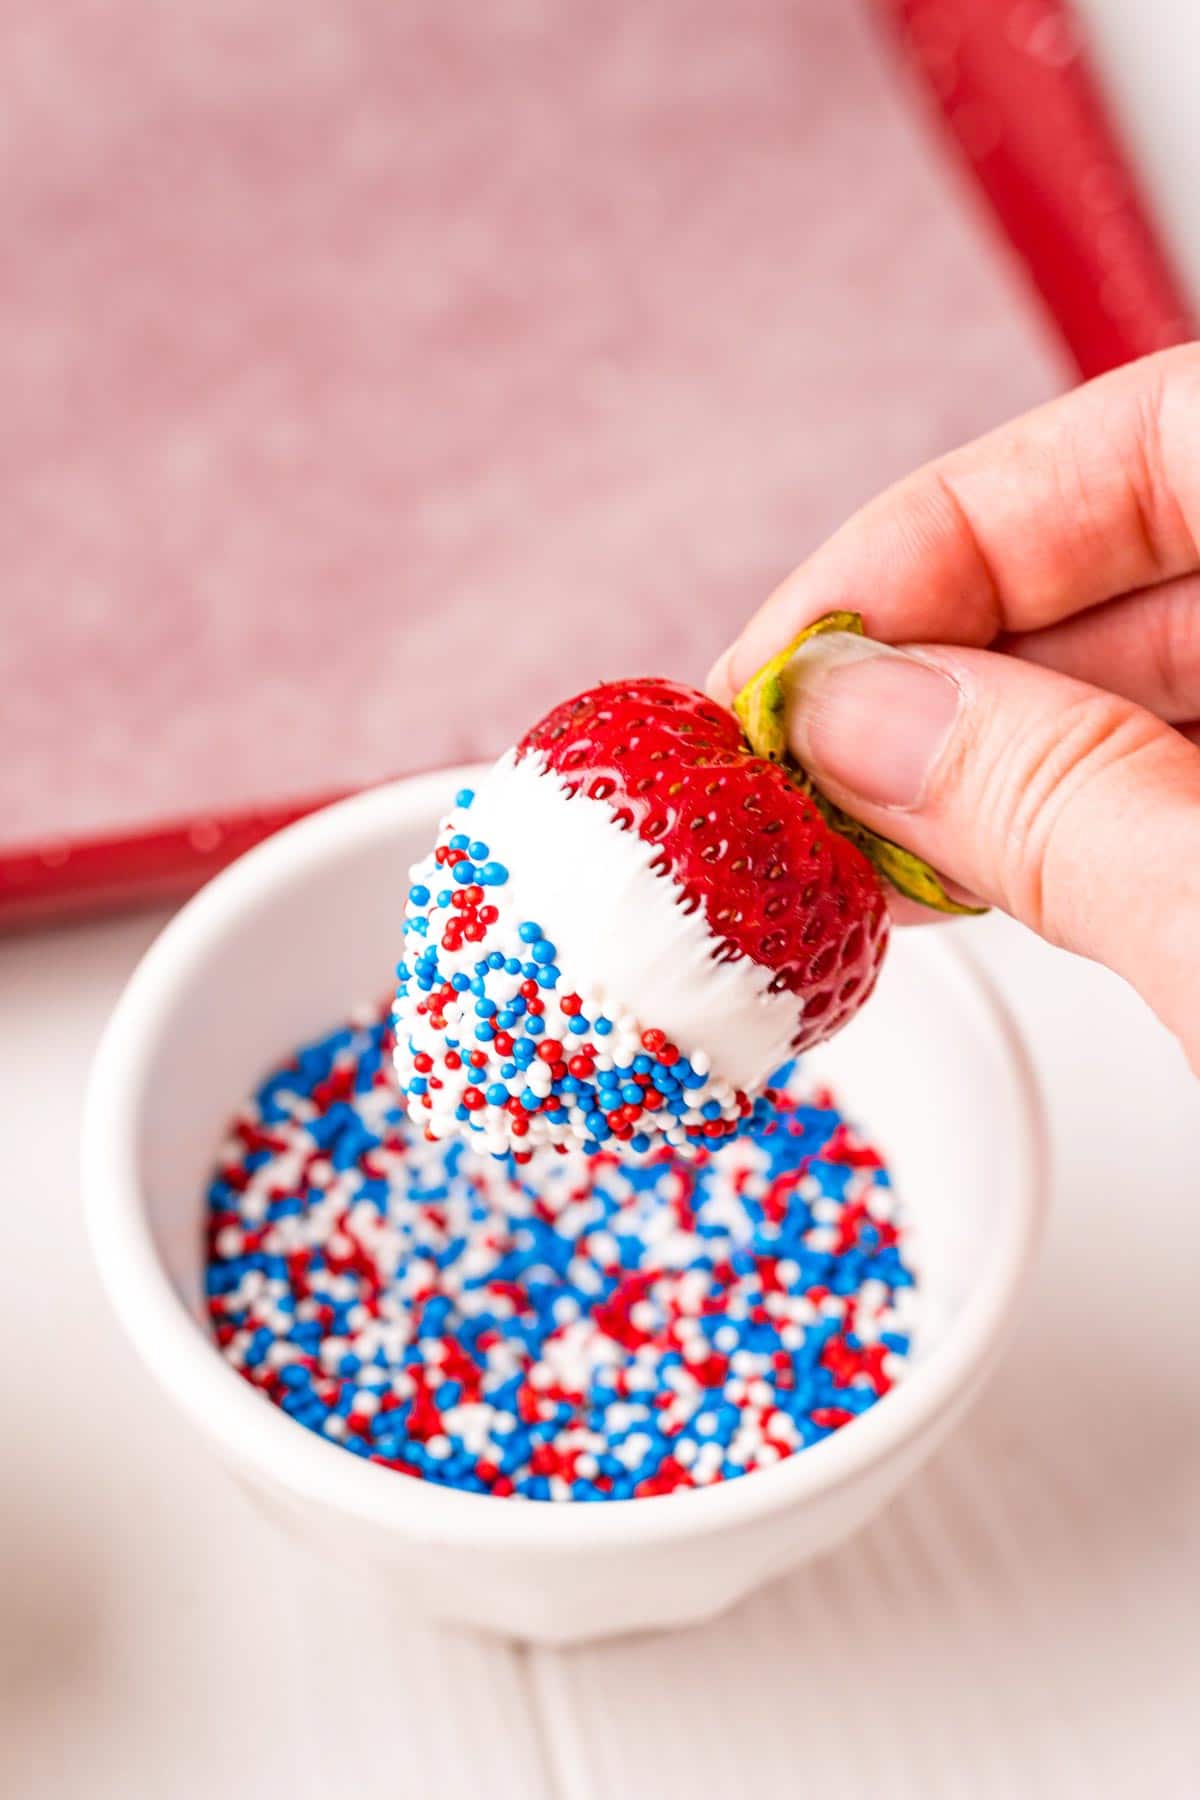 hand dipping a strawberry in sprinkles